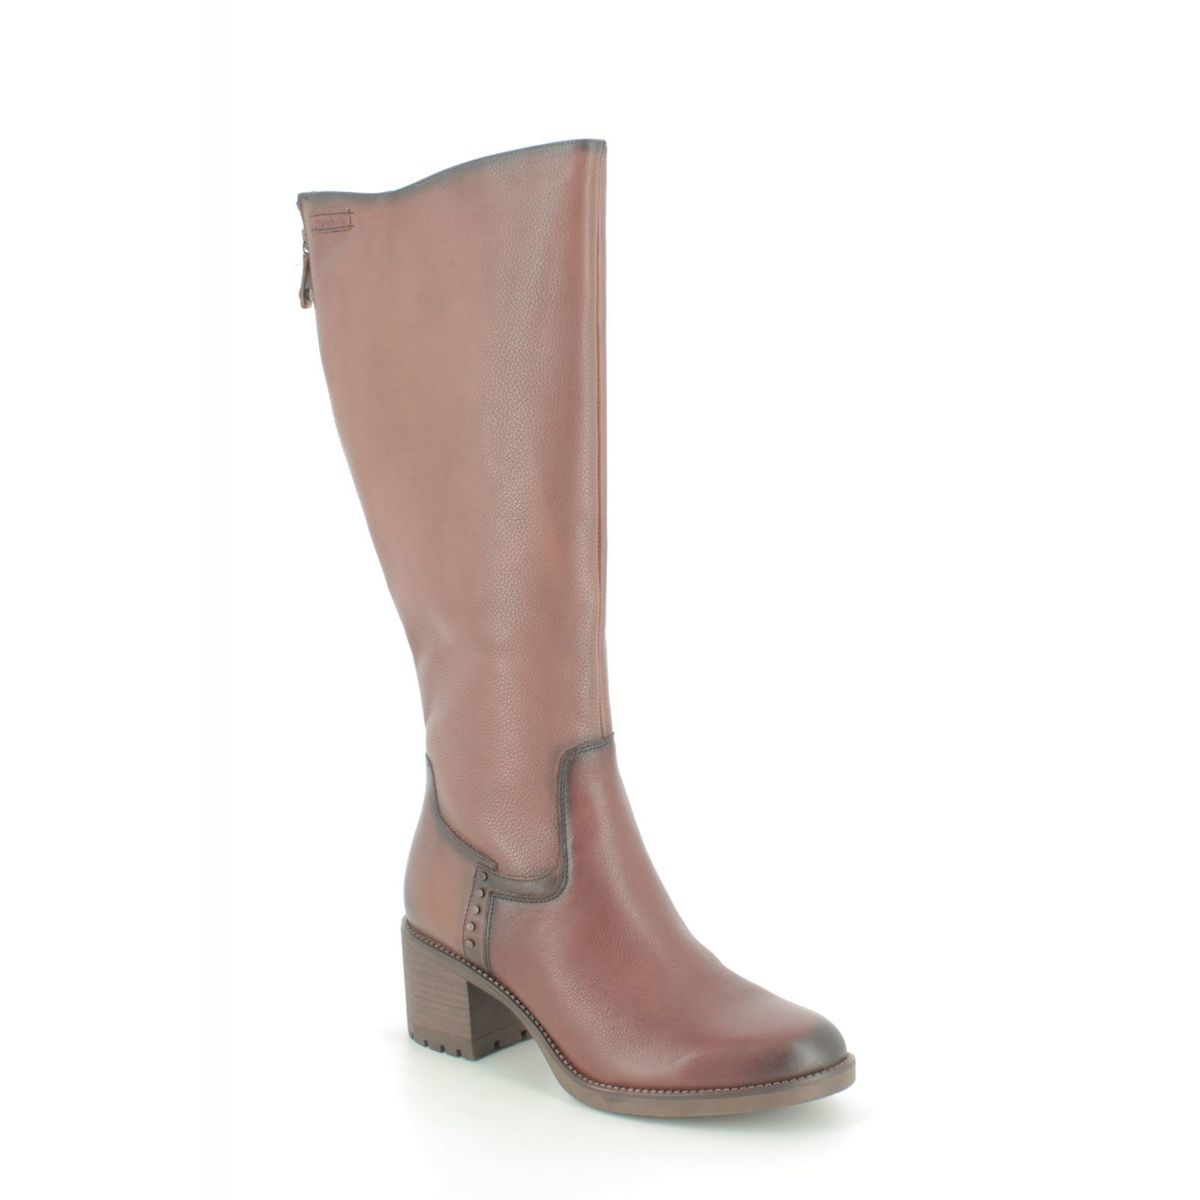 Tamaris Katelyn Wide Calf Tan Leather Womens knee-high boots 25604-25-449 in a Plain Leather in Size 37